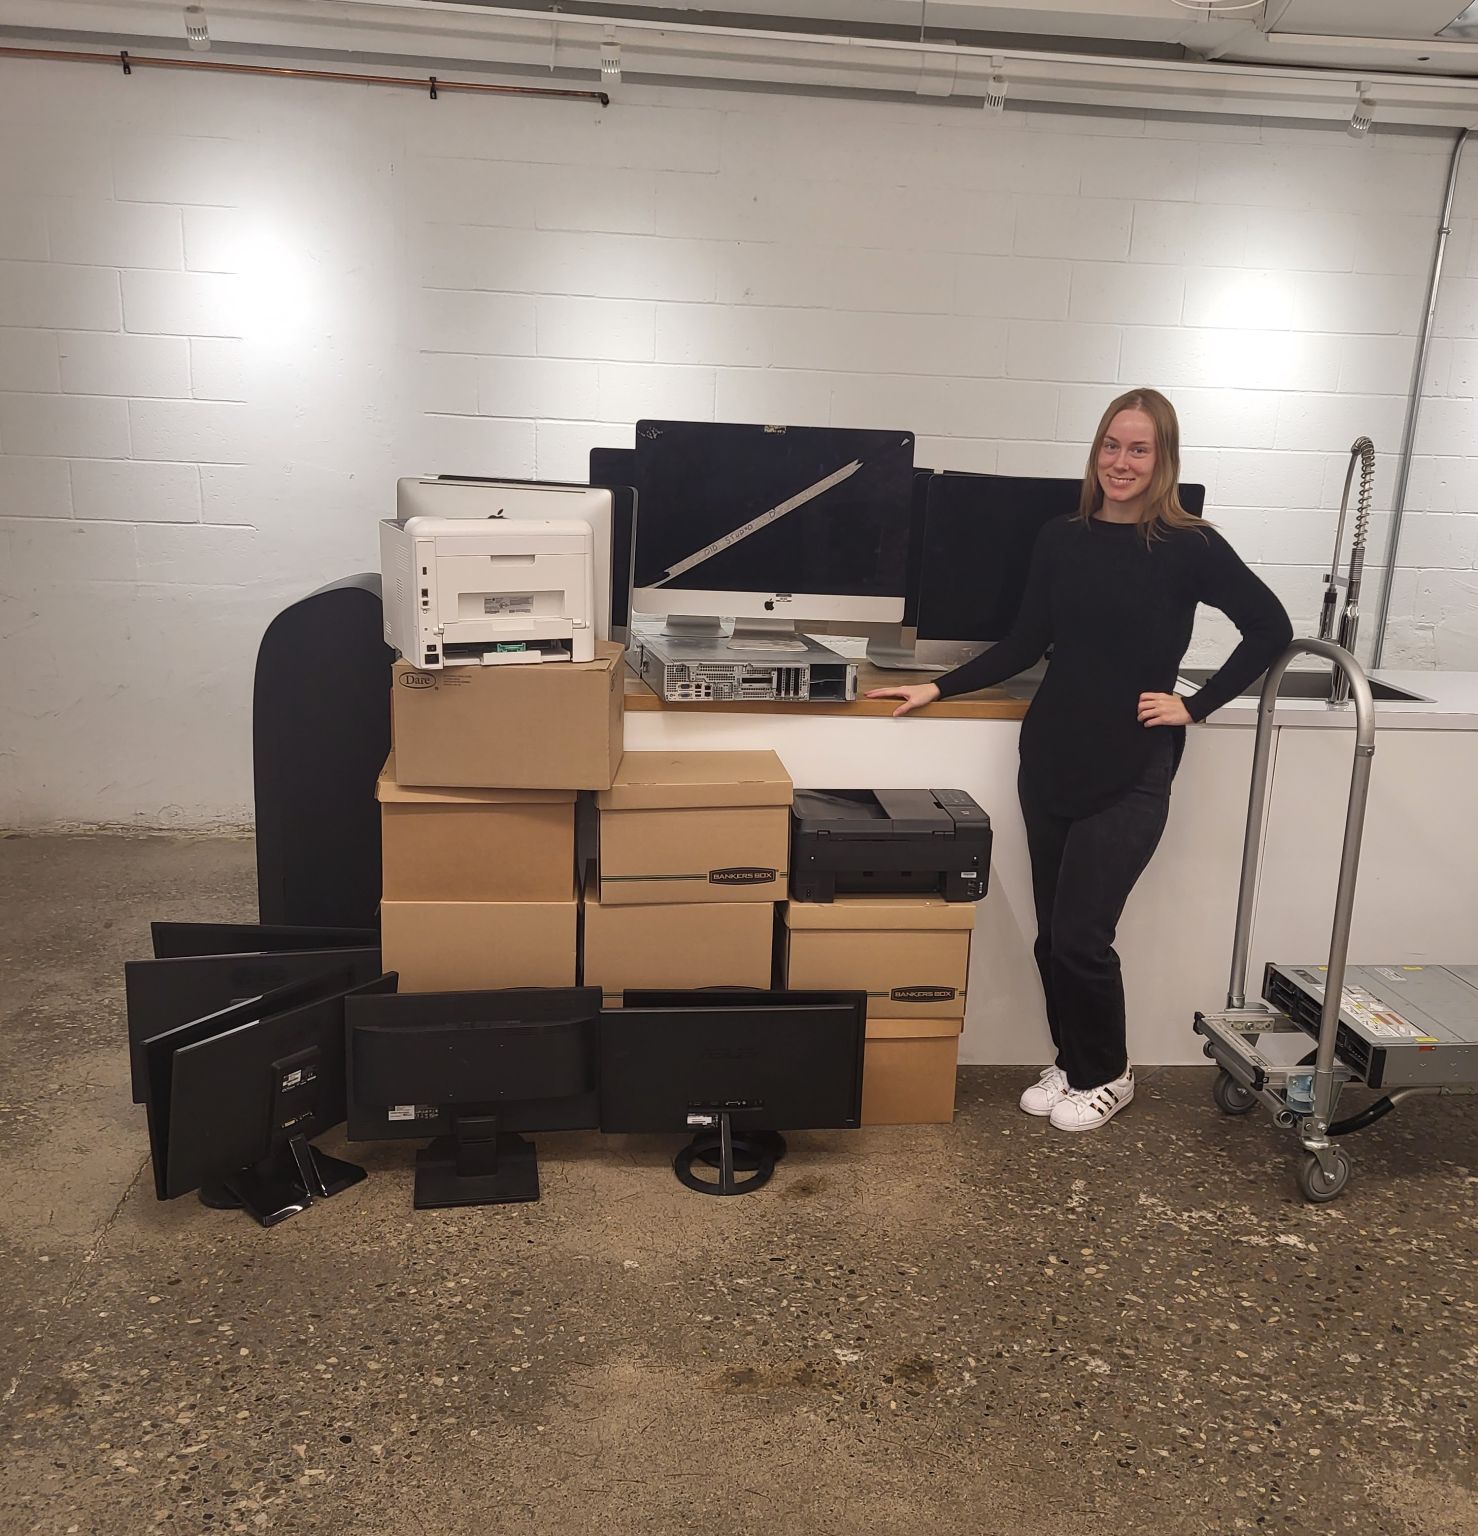 A representative of TAG Marketing poses with a large donation of retired IT equipment.